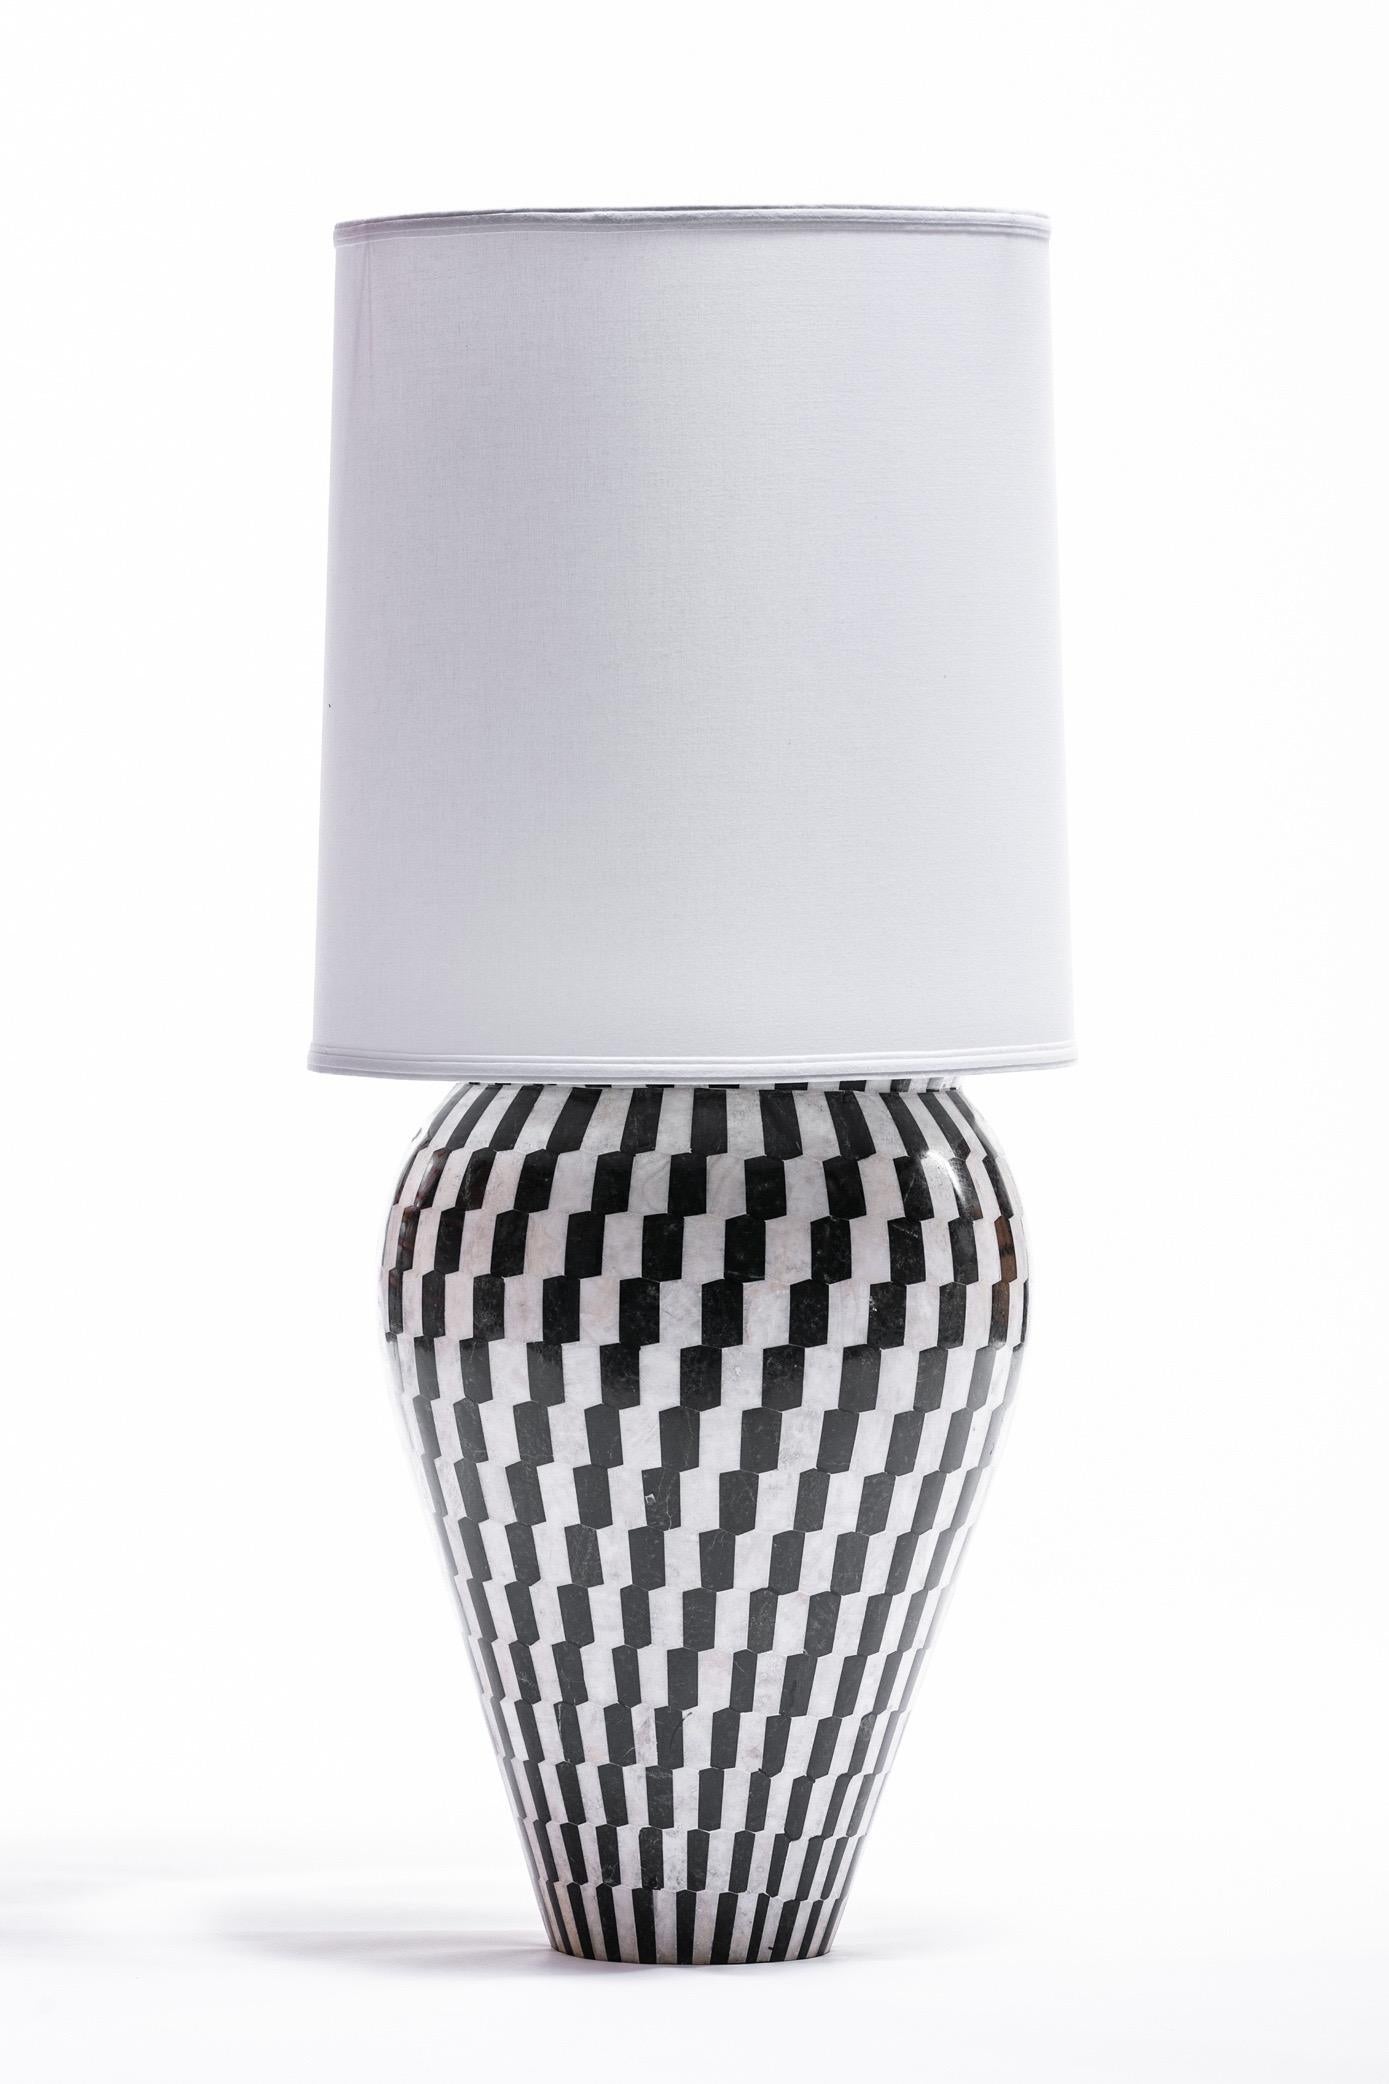 Pair of large scale Kelly Wearstler tessellated marble and onyx geometric urn shaped lamps. Black and white geometric tiles of marble and onyx cover the neoclassical forms. Dramatic and chic, elegant but playful. These lamps were custom designed for